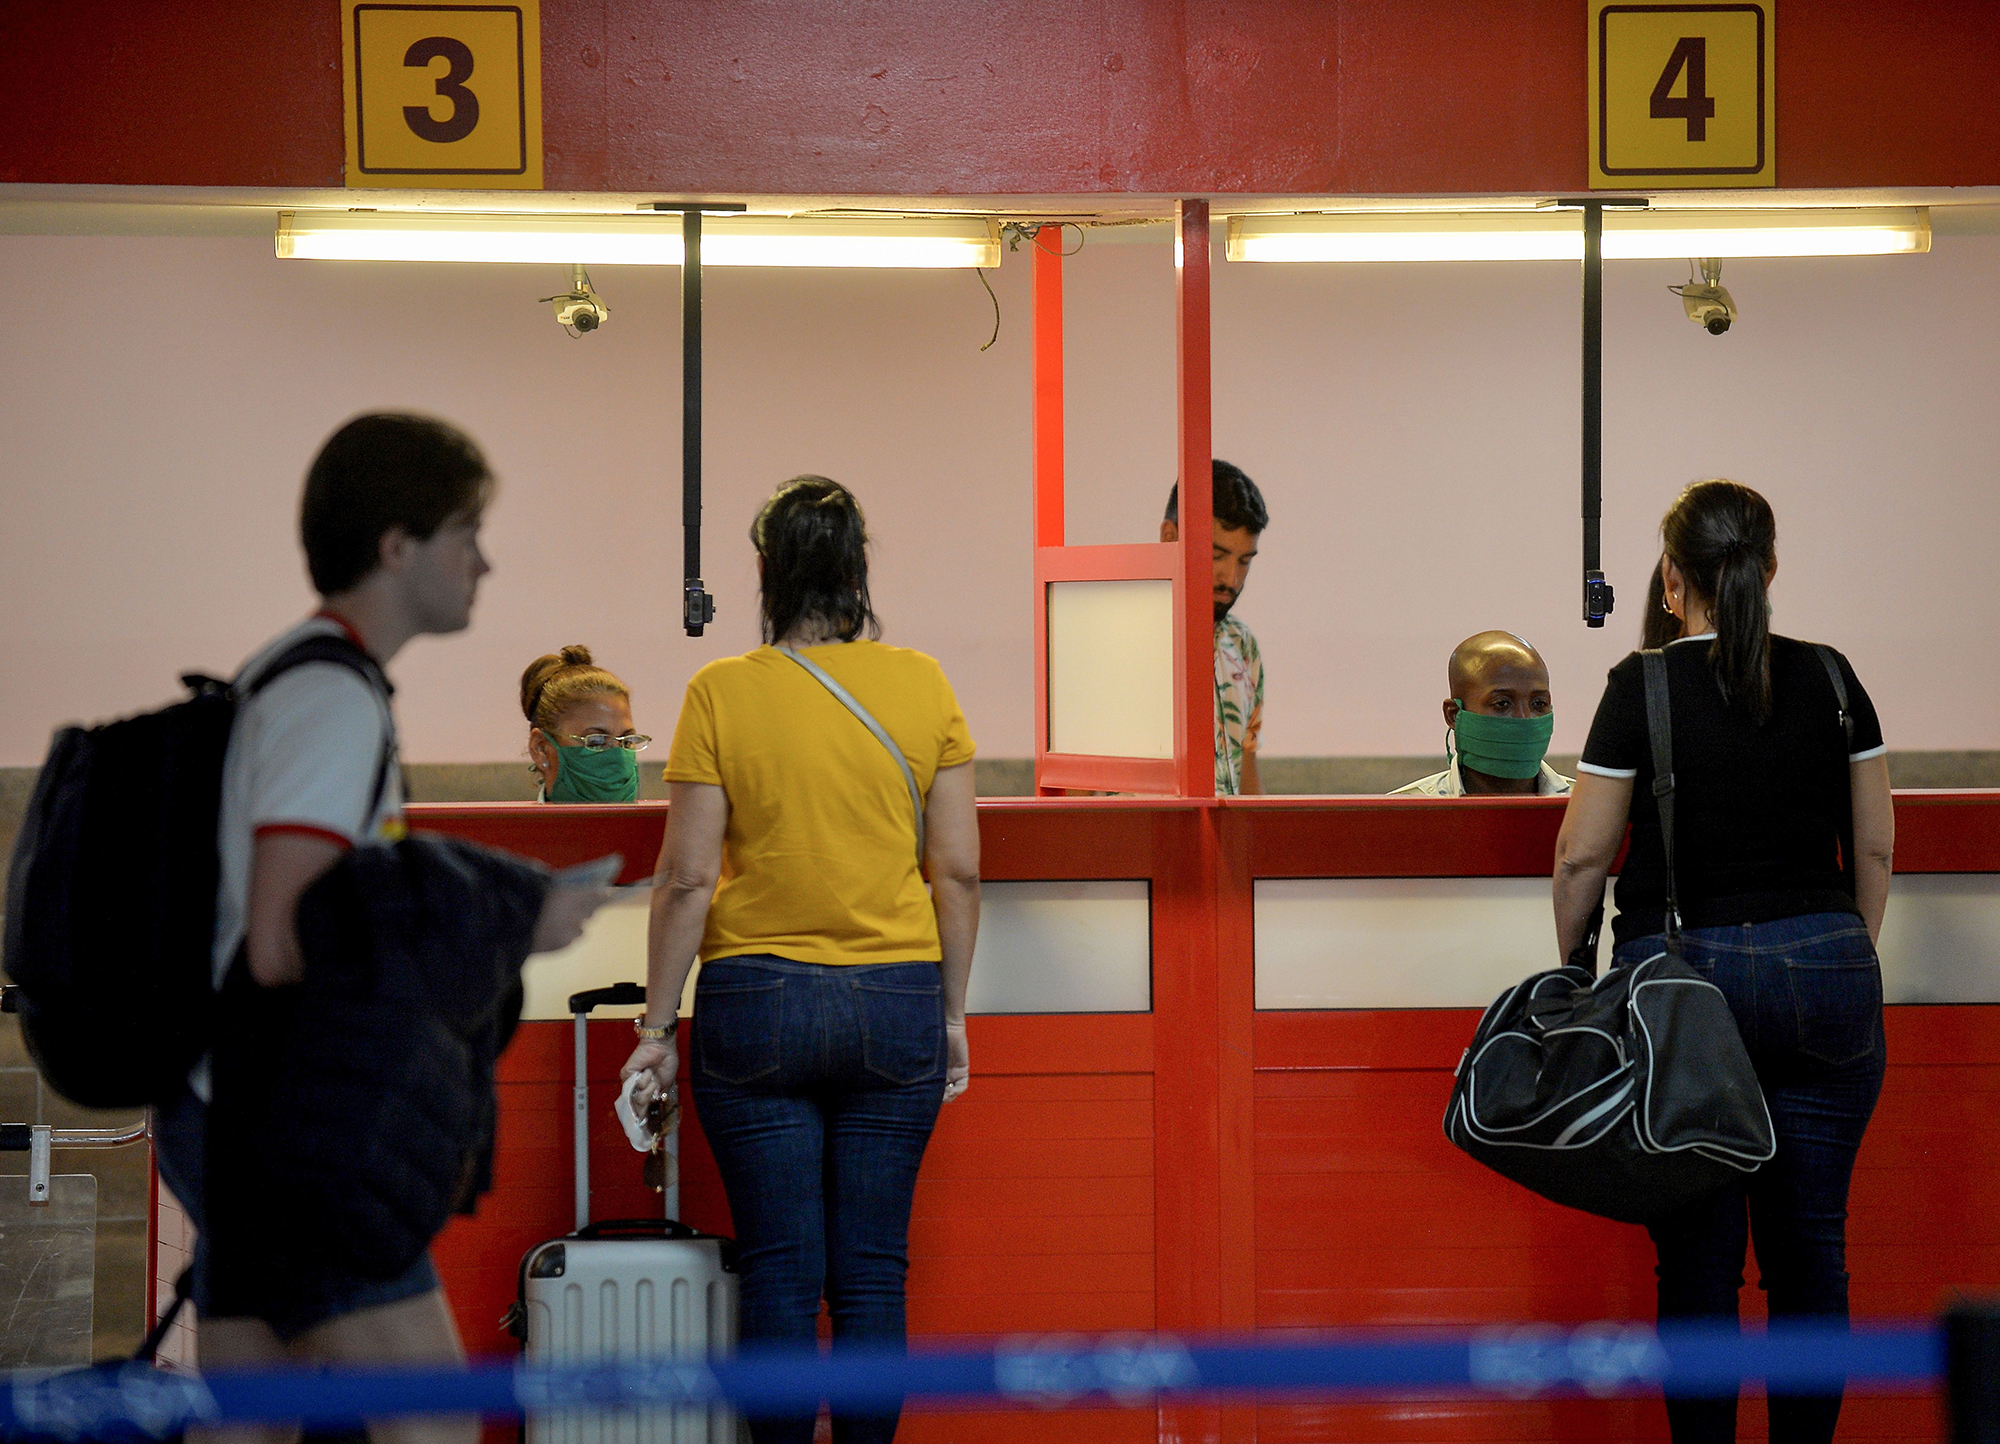 Airport workers wearing face masks attend tourists at the Jose Marti International Airport in Havana, on March 13.